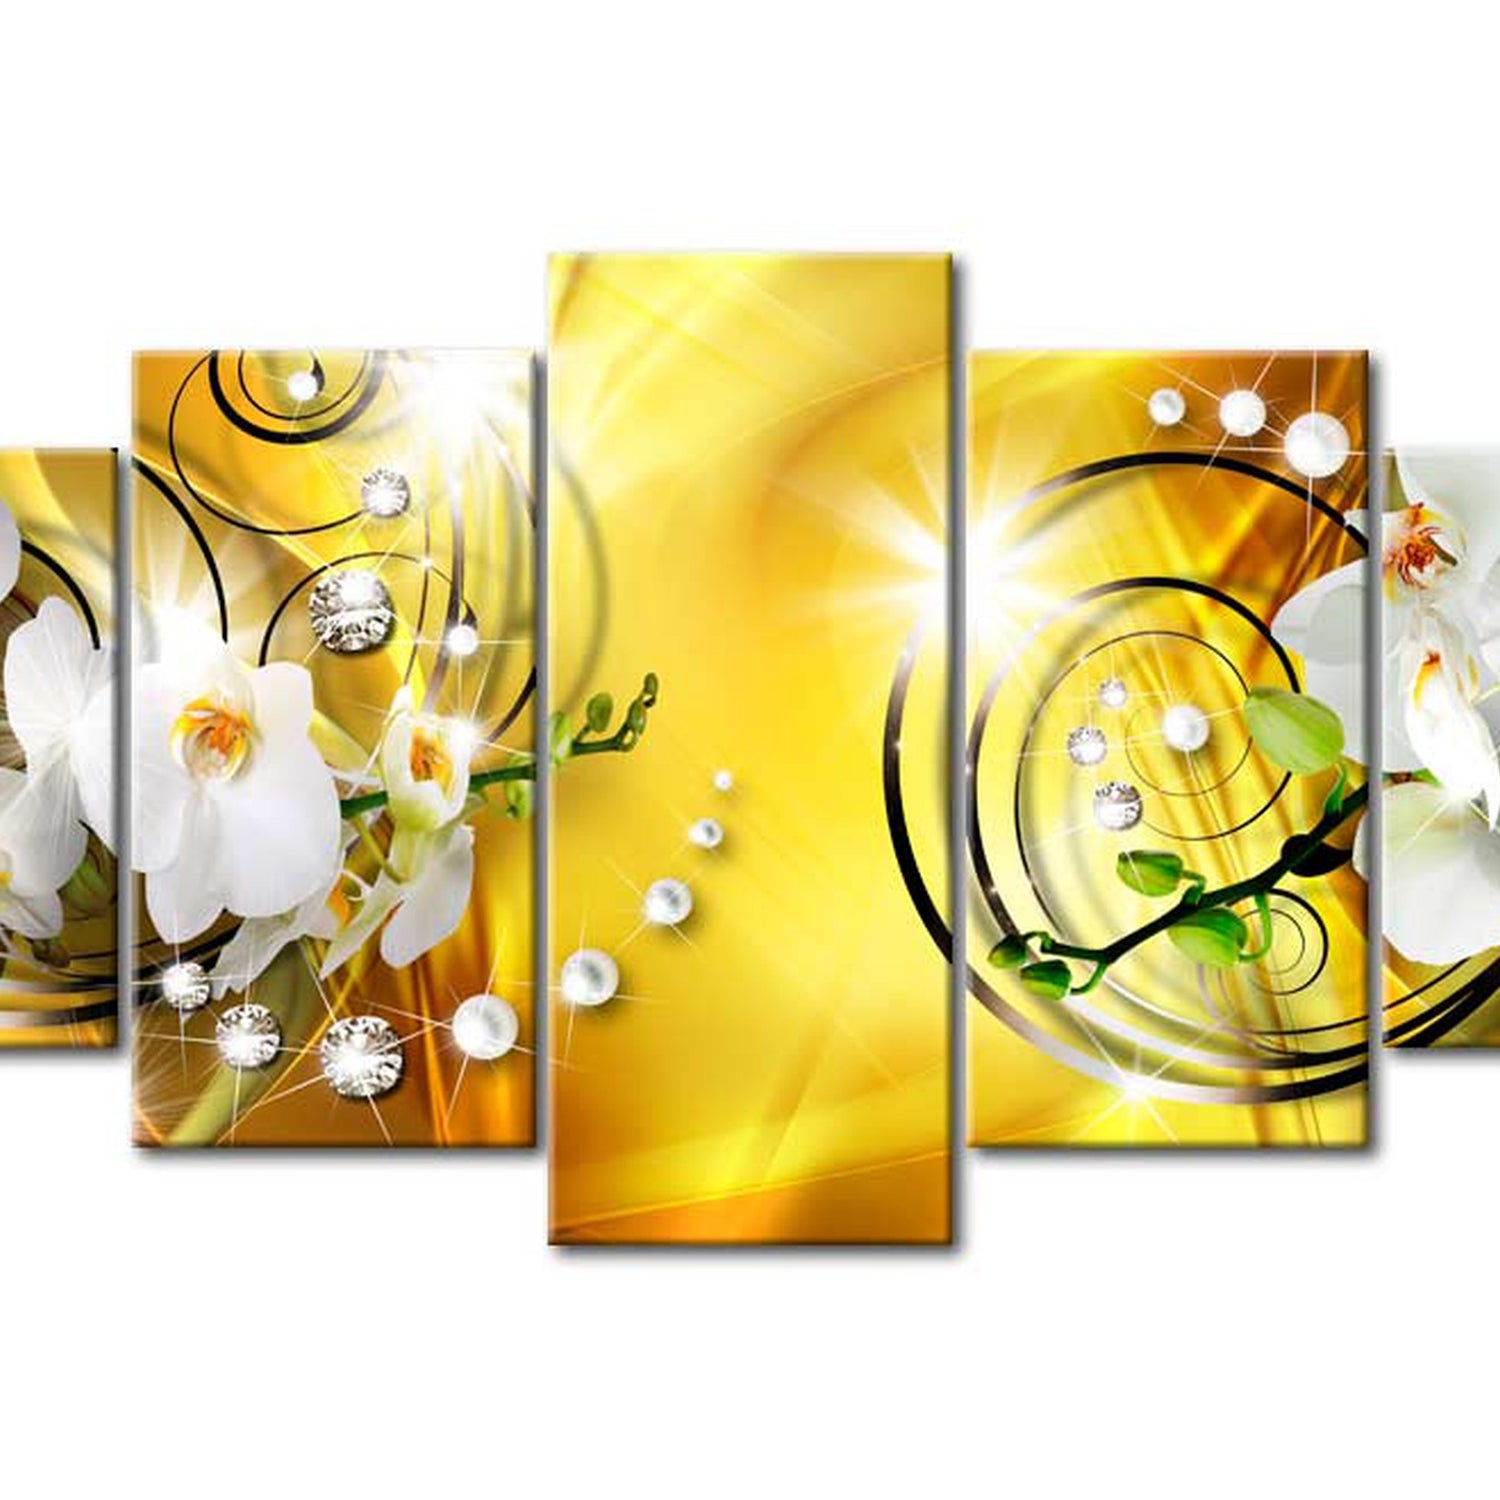 Glamour Canvas Wall Art - Yellow Admiration - 5 Pieces